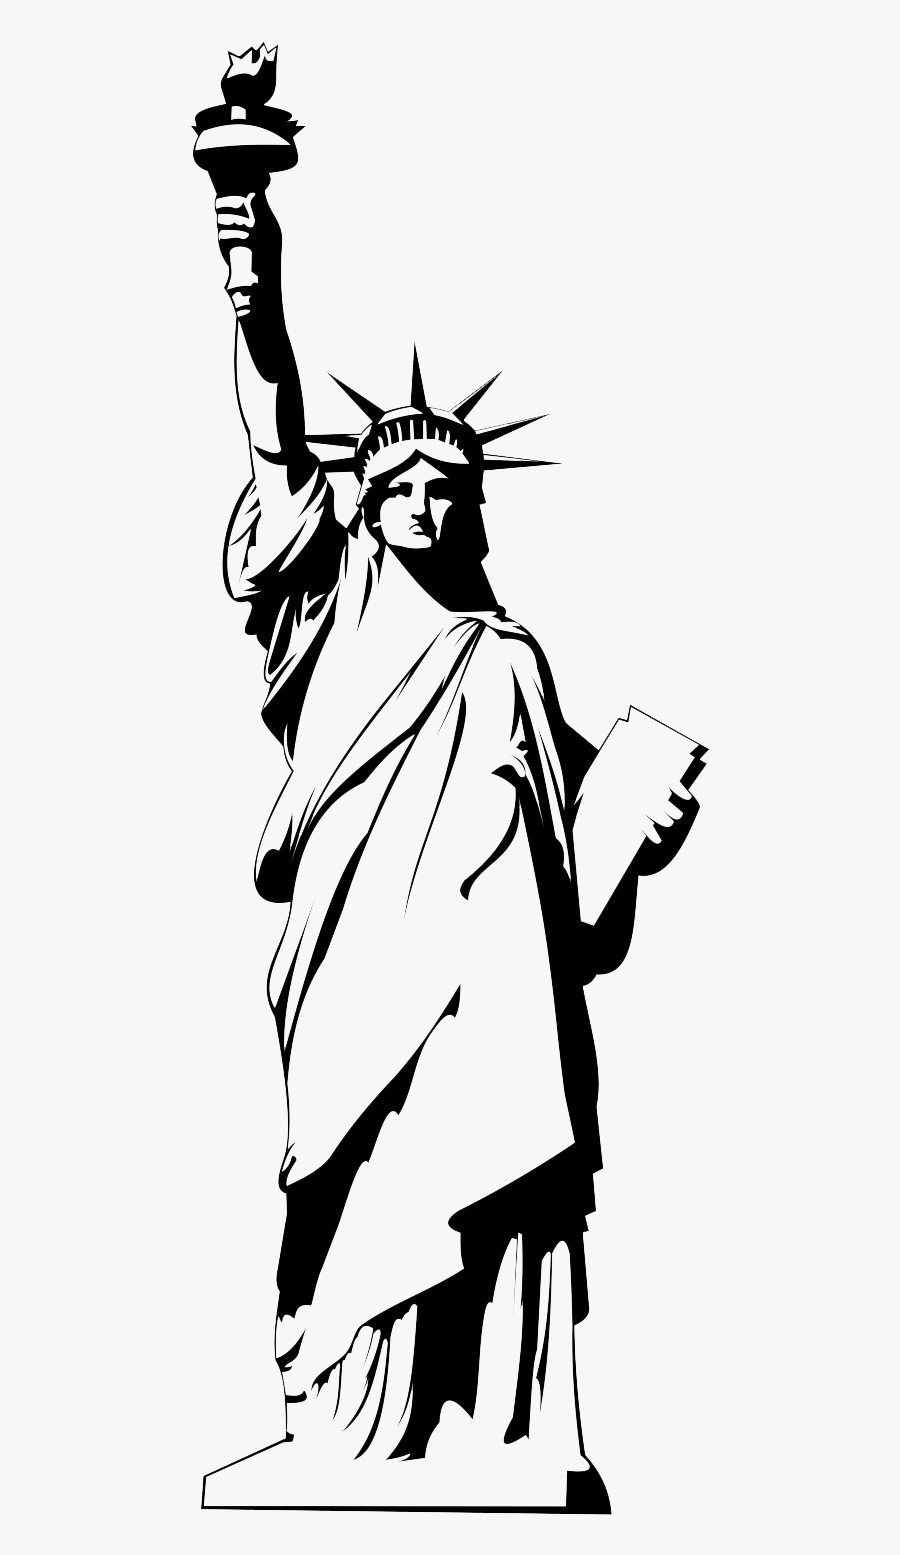 Statue Of Liberty Png Image - Statue Of Liberty Drawn, Transparent Clipart